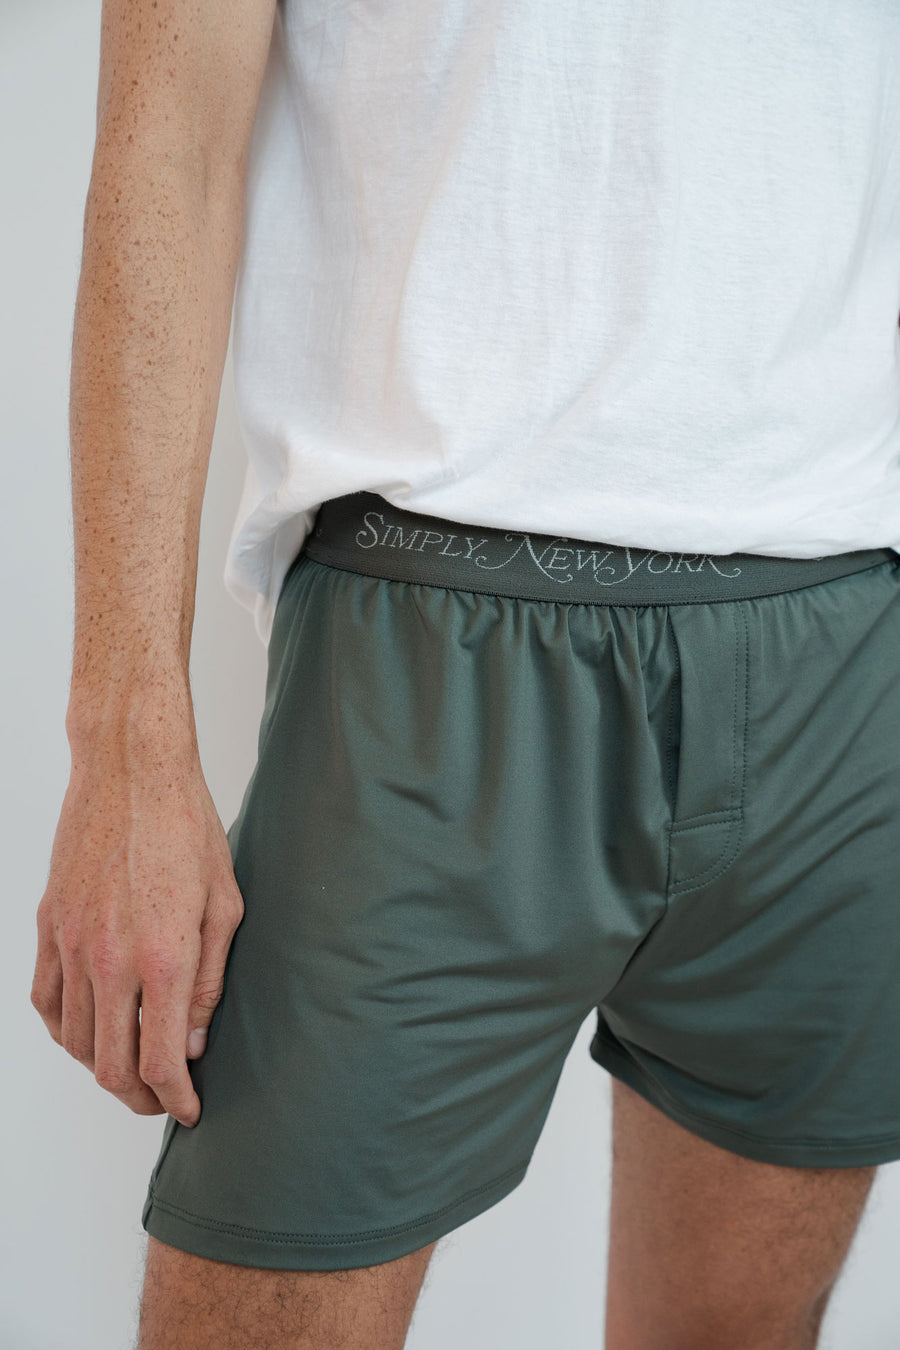 The Active New Yorker (Limited Edition) – Simply Boxers